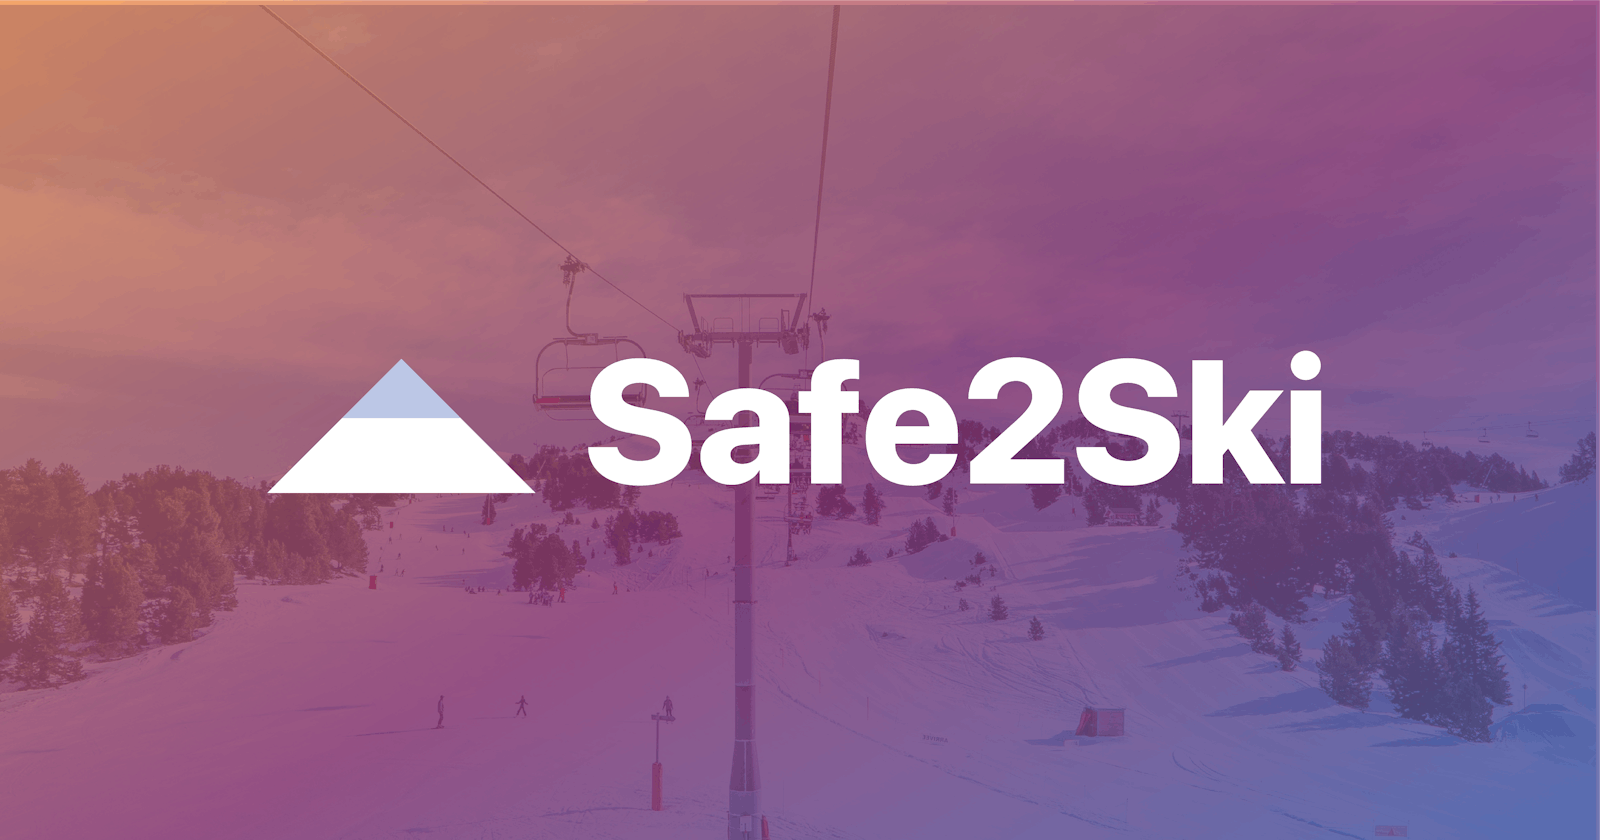 Making Ski Trips Safer With Real-Time Data ⛷